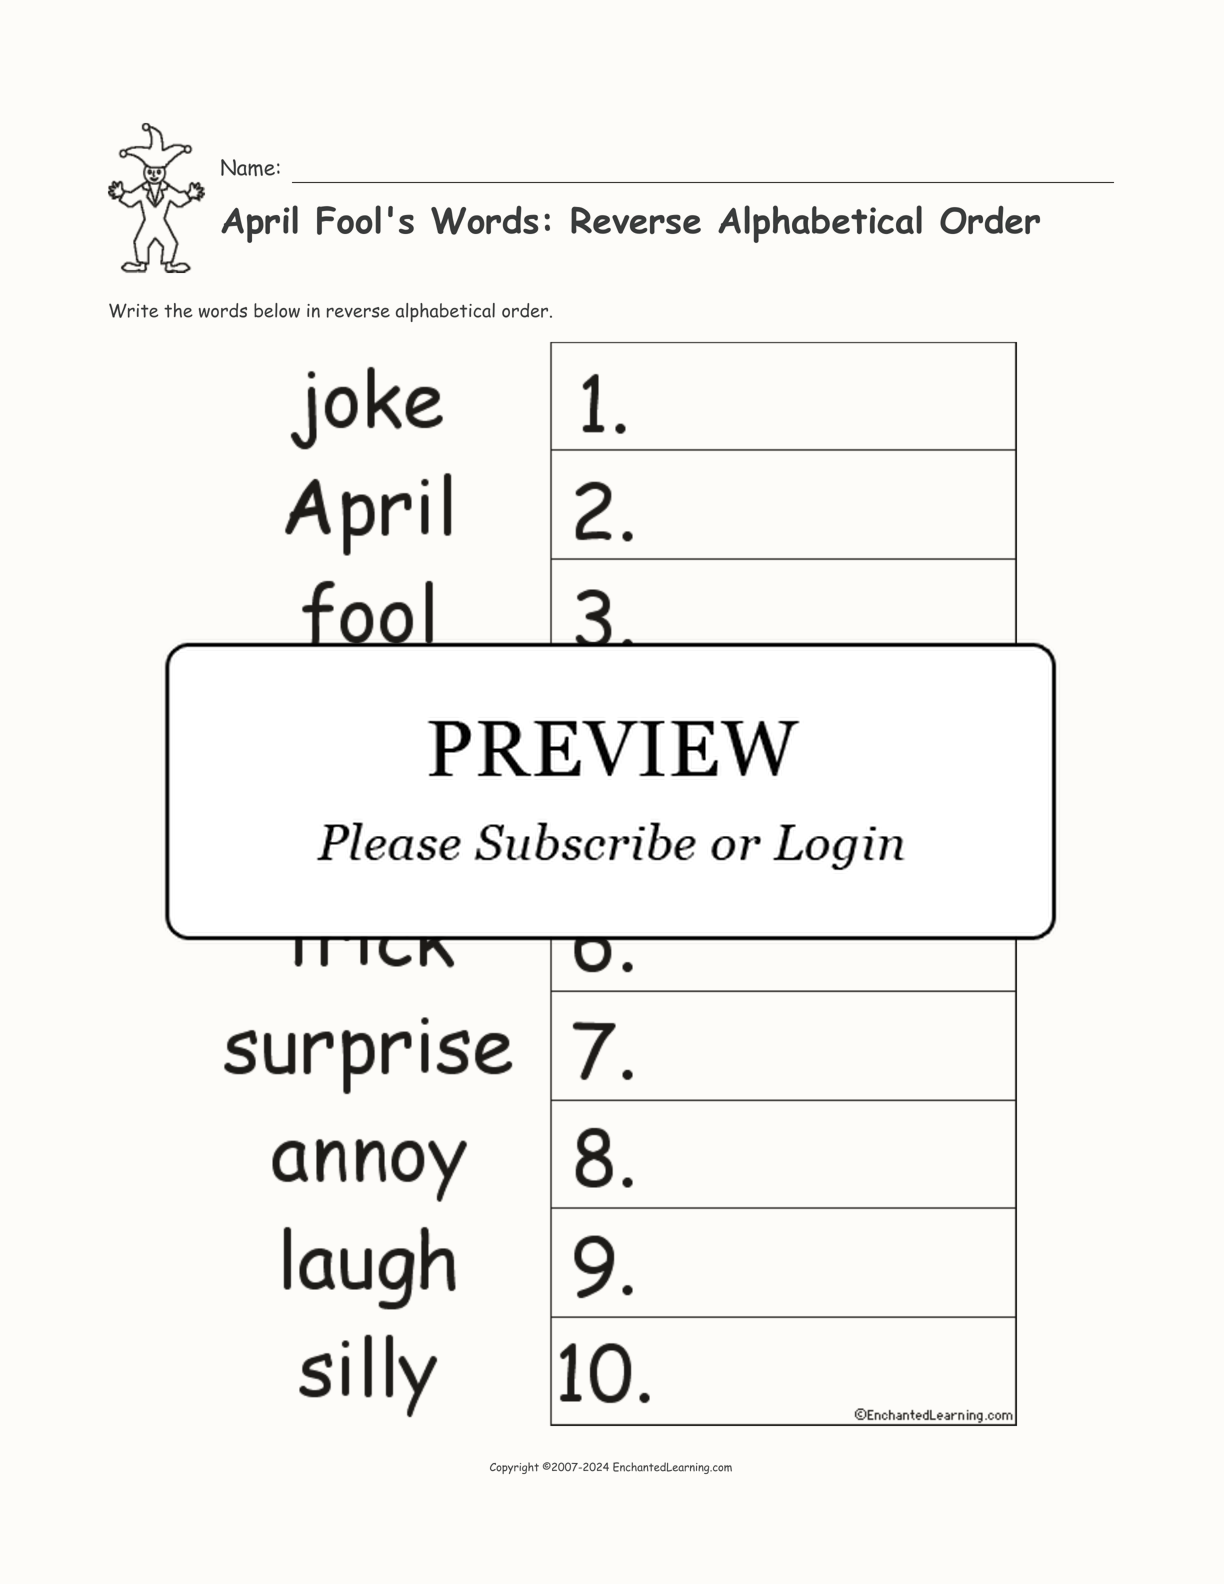 April Fool's Words: Reverse Alphabetical Order interactive worksheet page 1